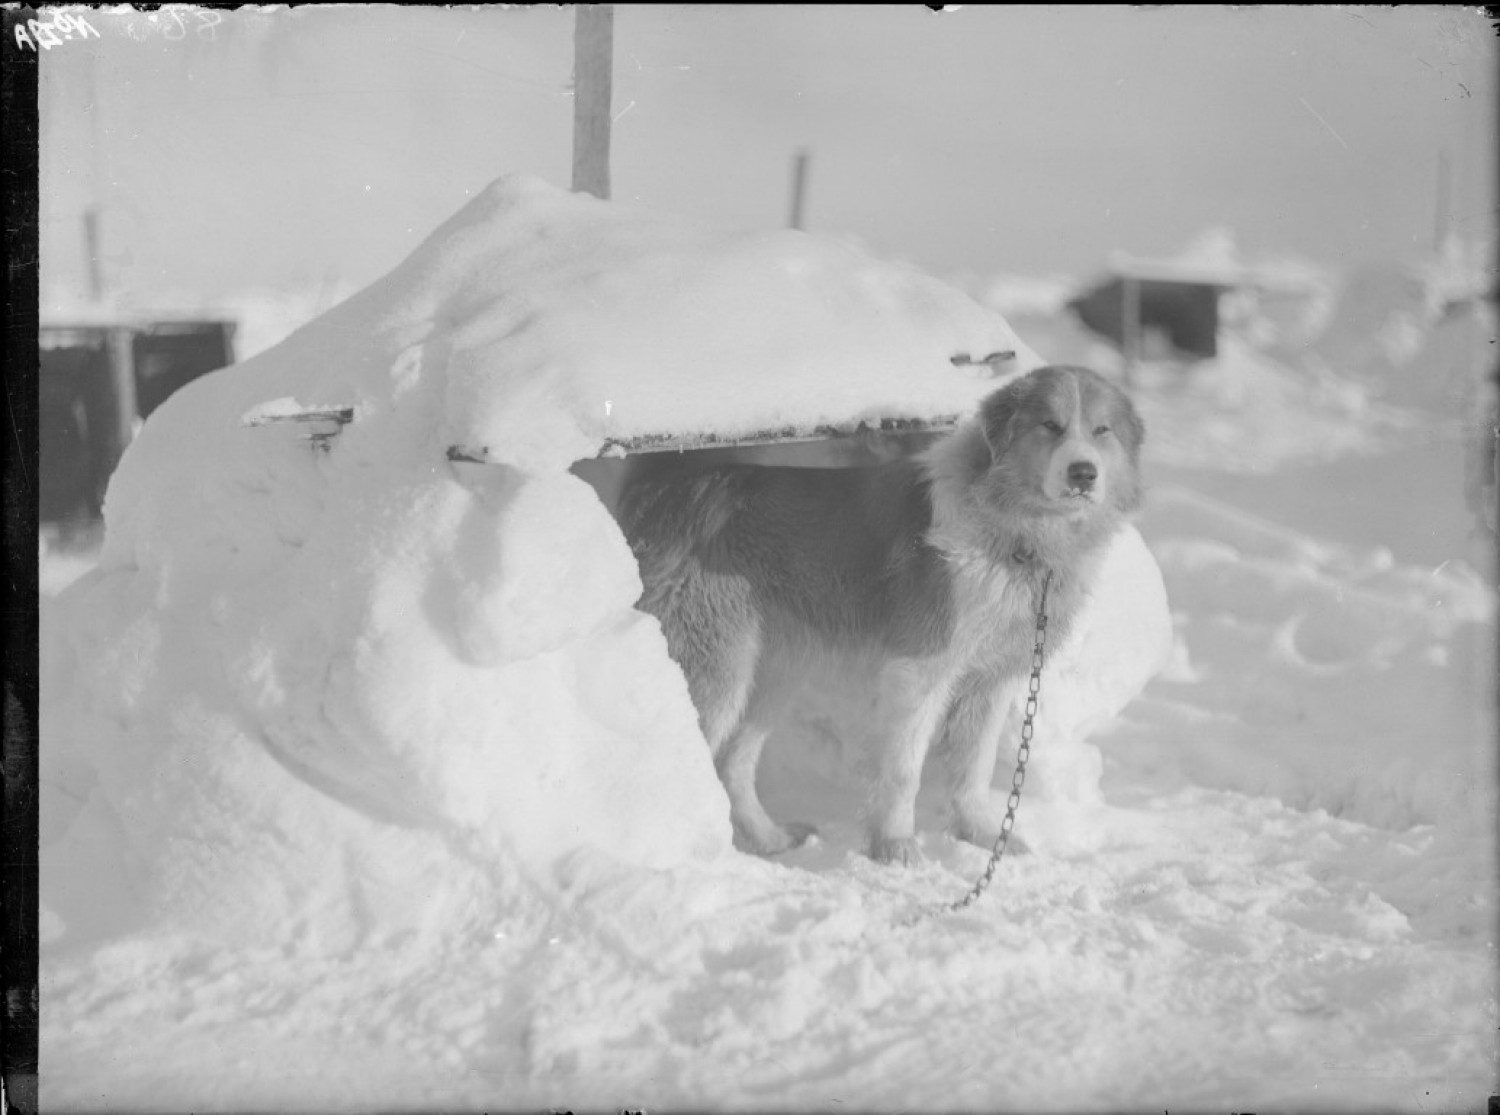 Samson, one of the dogs that went to the ice with Shackleton's Ross Sea Party.